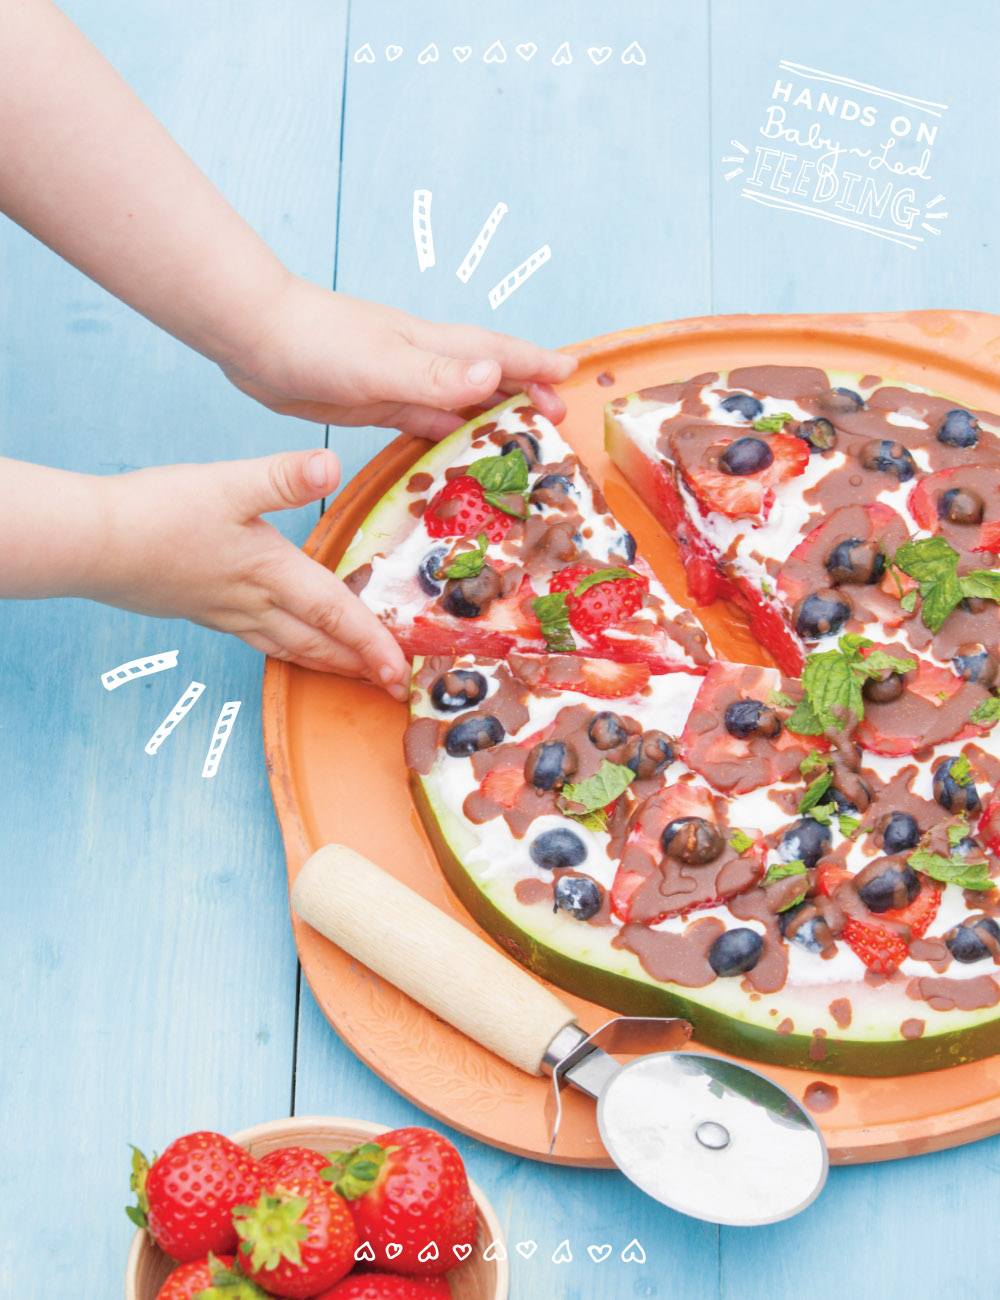 Baby Led Feeding Healthy Watermelon Fruit Pizza. Oscars hand taking pizza. Healthy Summer Family Treats. A deliciously healthy, yummy treat for kids on a hot summers day. This baby led weaning recipe is easy to make and so nutritious, refined sugar free treat packed with goodness. Great for baby led feeding or as a recipe for baby led weaning.